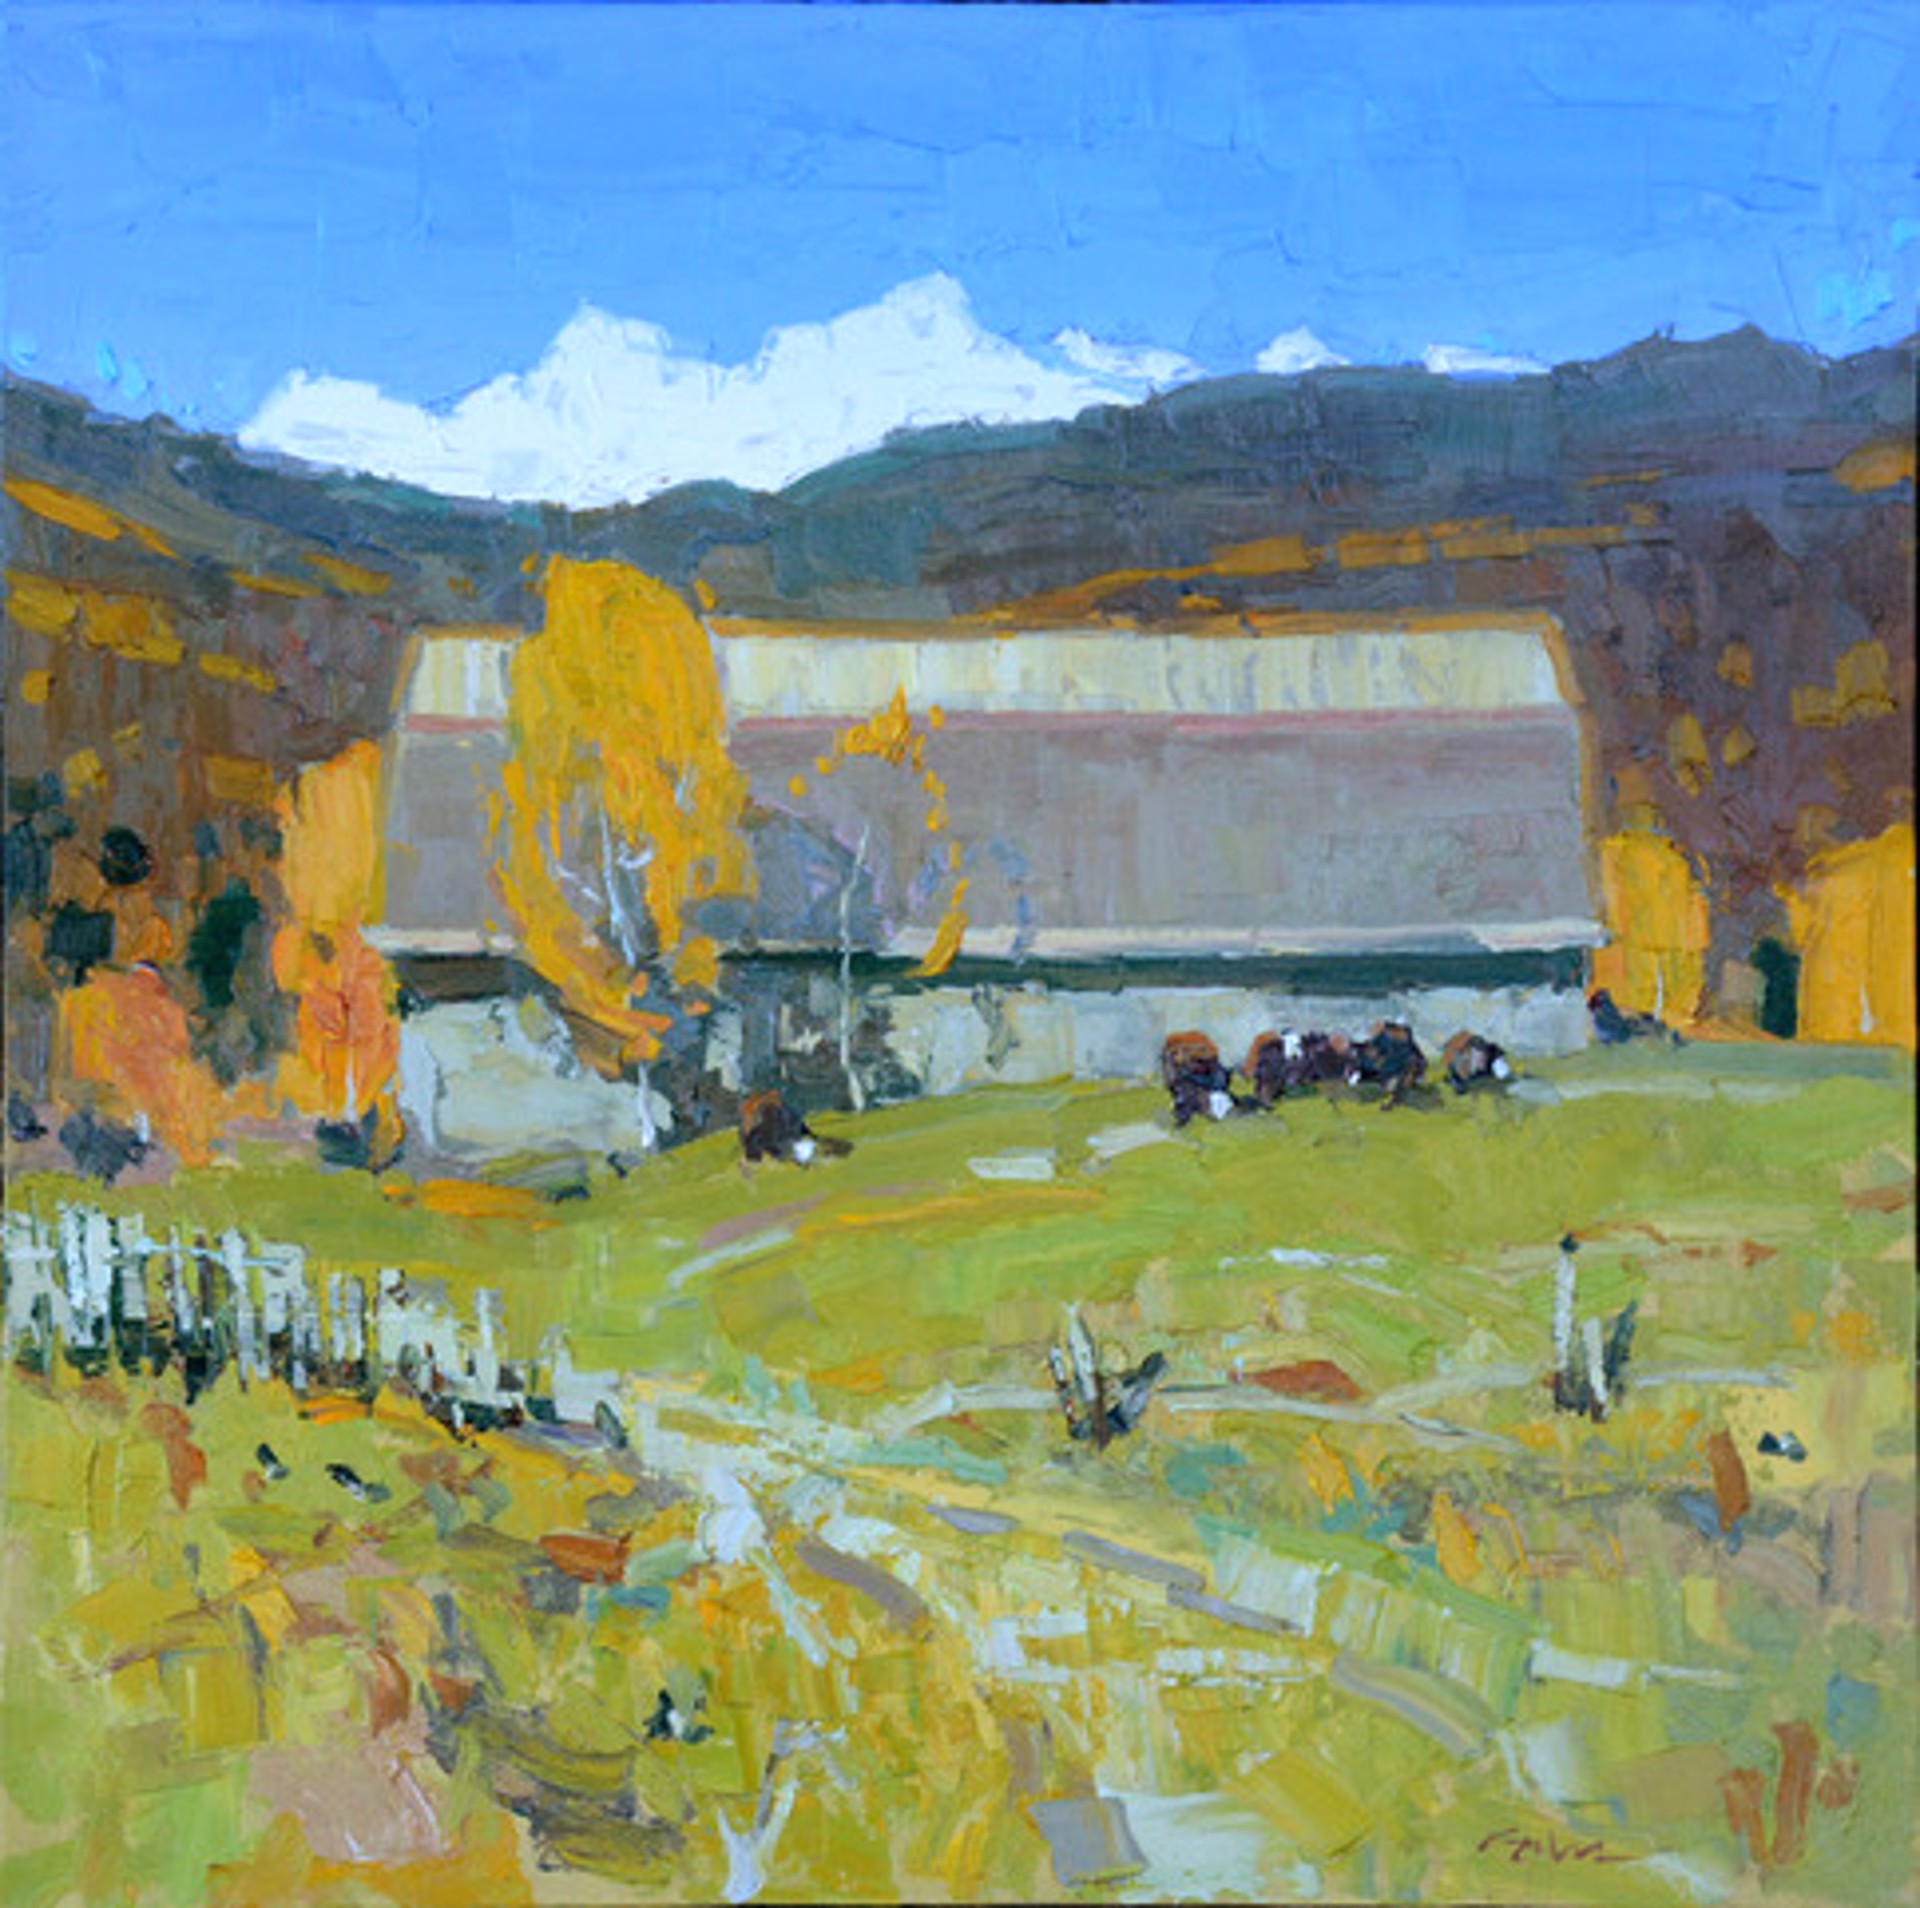 A Palette Knife Oil Painting Of A Barn Nestled In A Hillside With Cows In Front By Silas Thompson At Gallery Wild